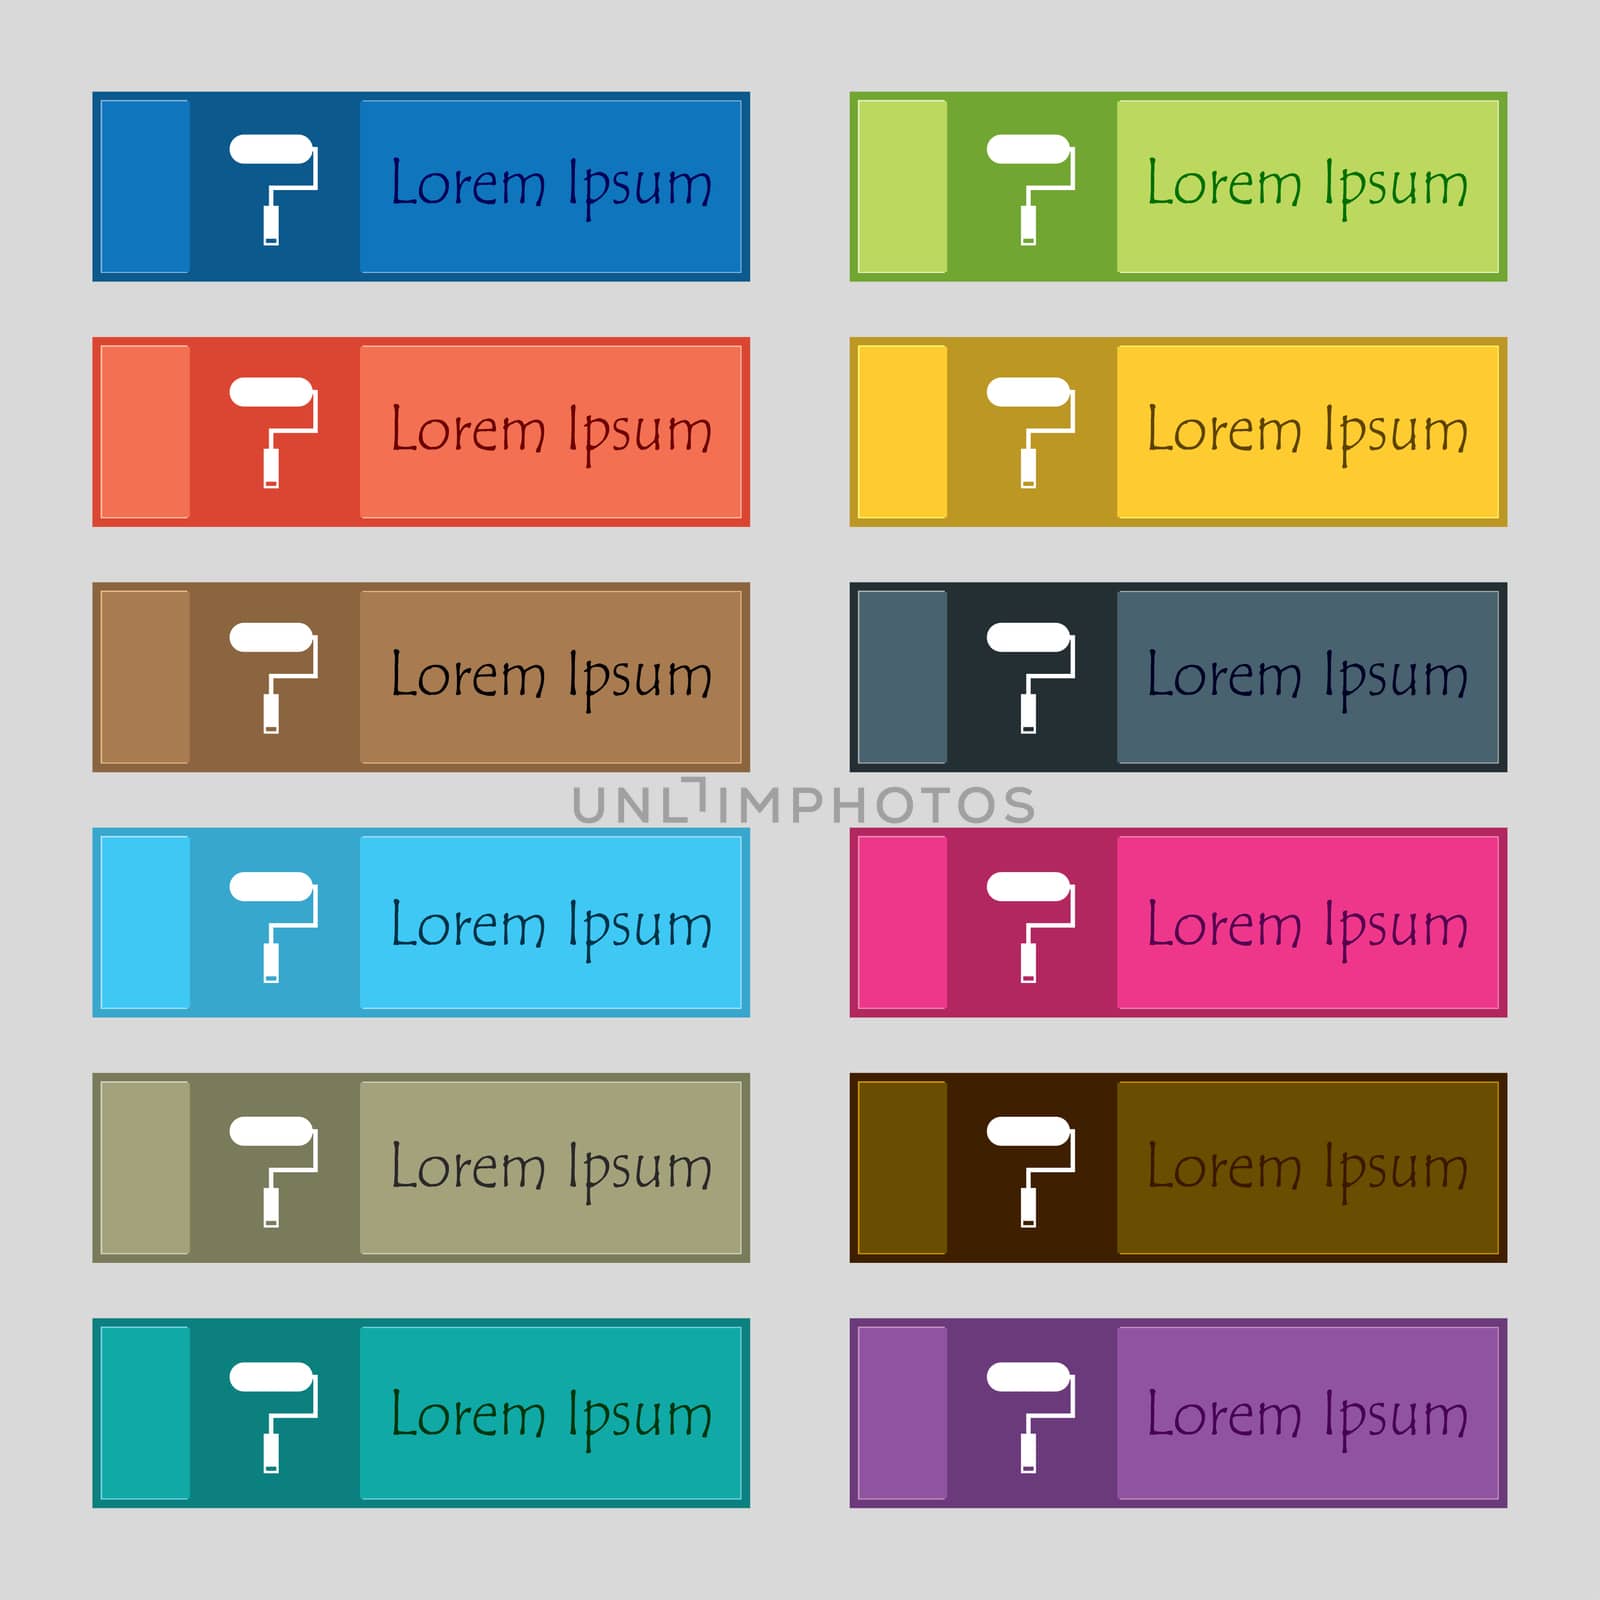 Paint roller sign icon. Painting tool symbol. Set of colored buttons. illustration